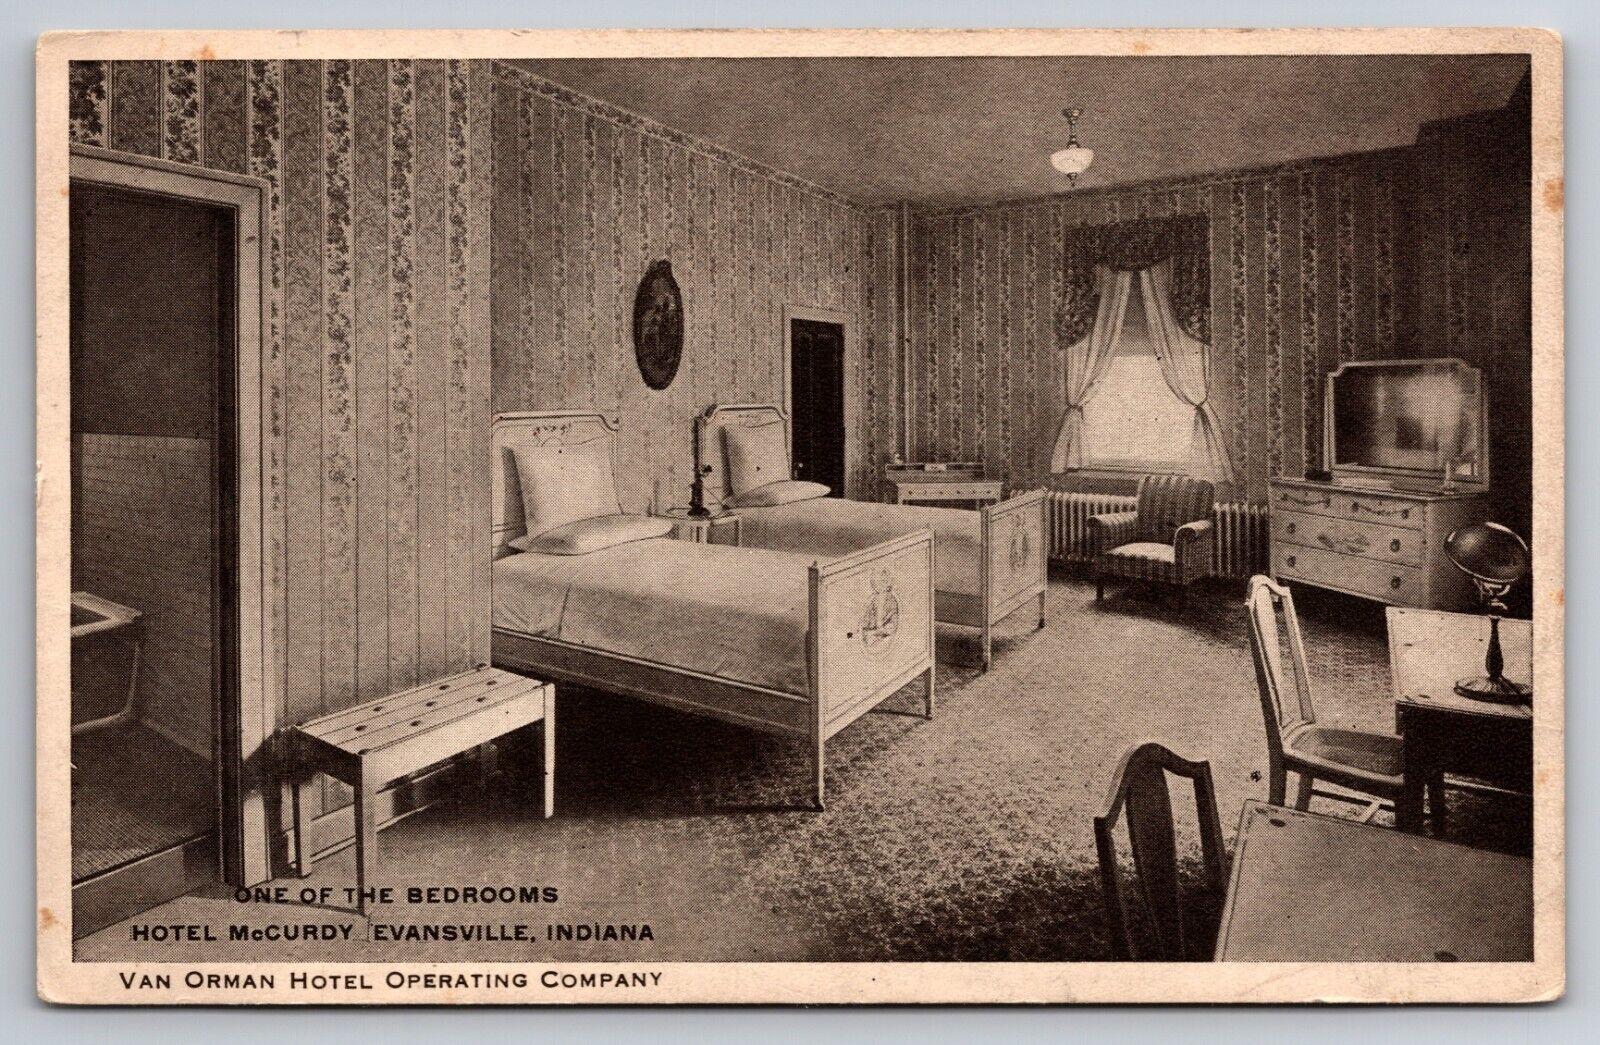 One of the Bedrooms Hotel McCurdy Evansville Indiana IN c1910 Postcard